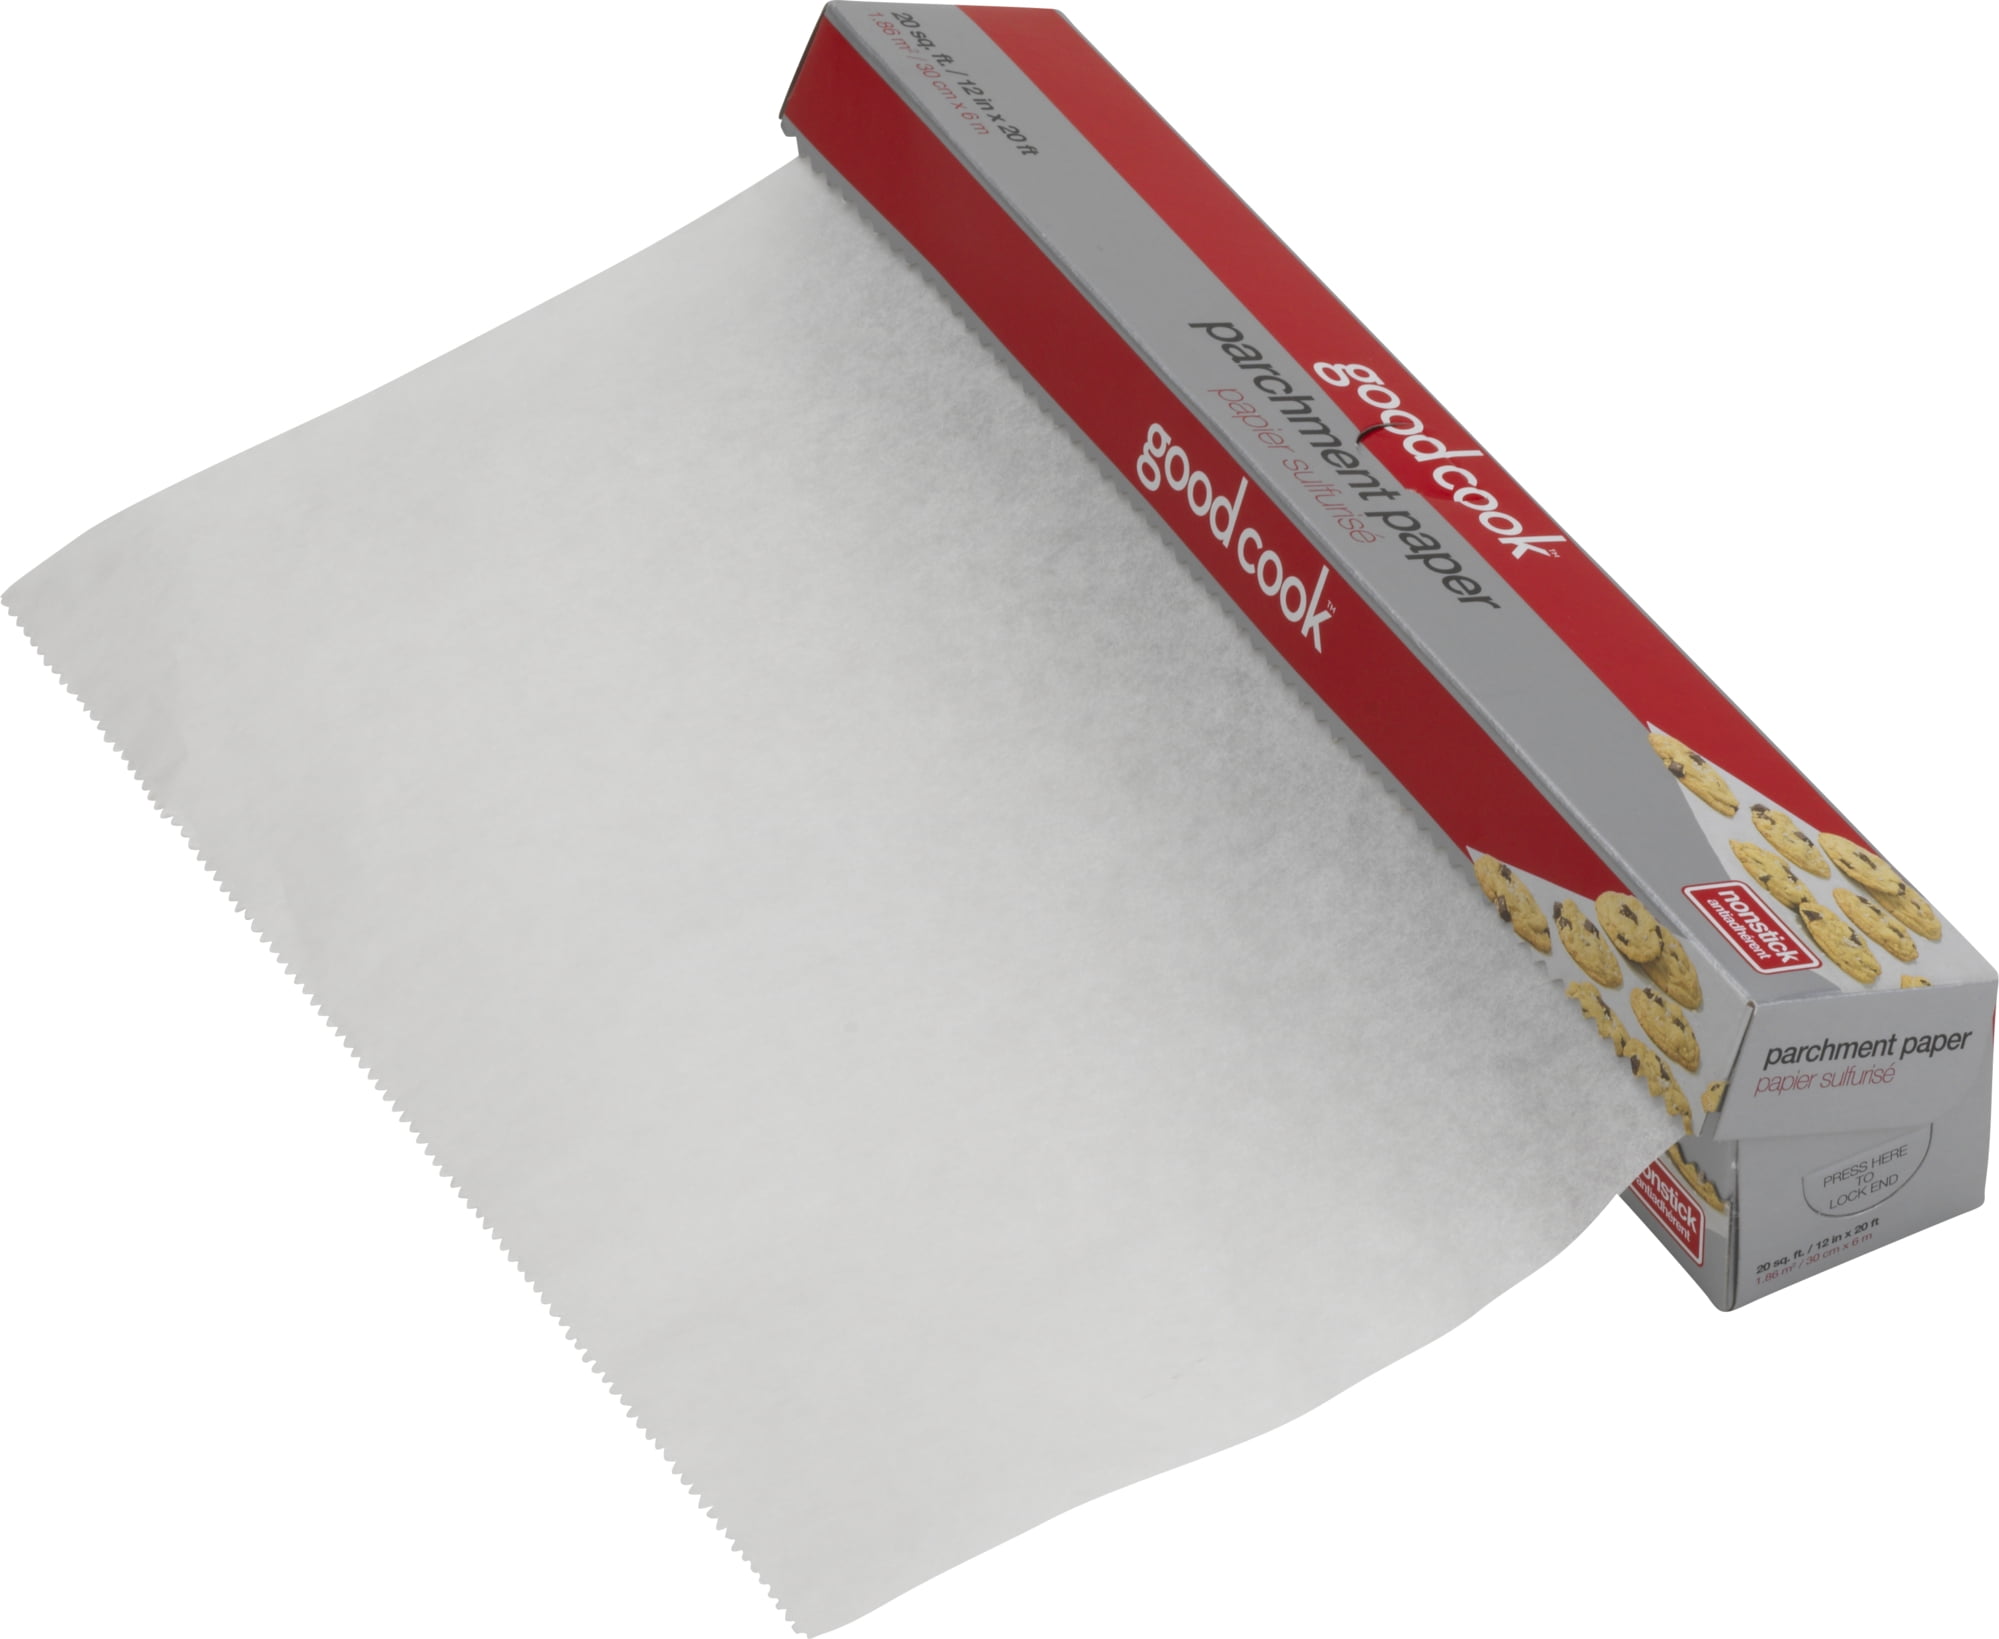  Parchment Paper Sheets for Baking: Oven Safe Parchment Paper,  Parchment Sheets, Bakery Quality Baking Paper for Perfect Results, High  Temperature, Cooking Sheets, 24 Count, 9 Inch Square: Home & Kitchen